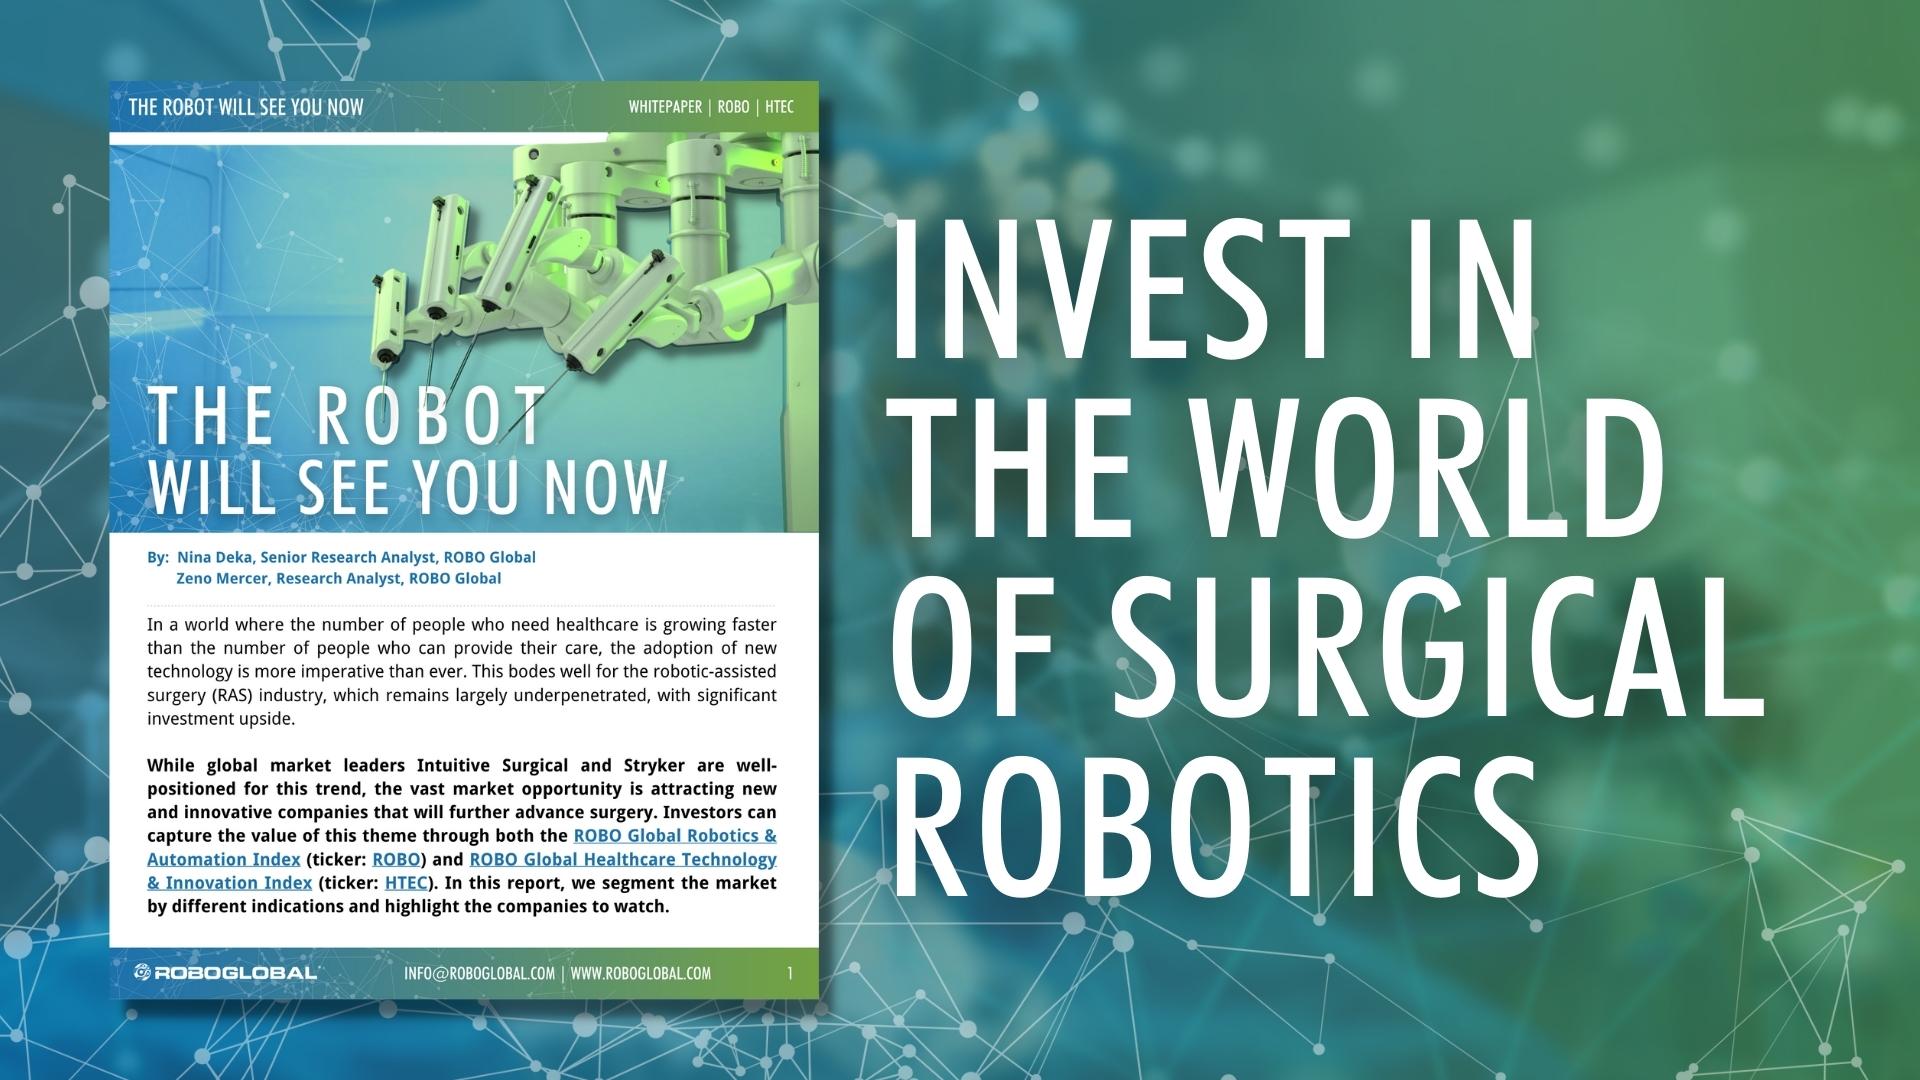 Investing in the World of Surgical Robotics